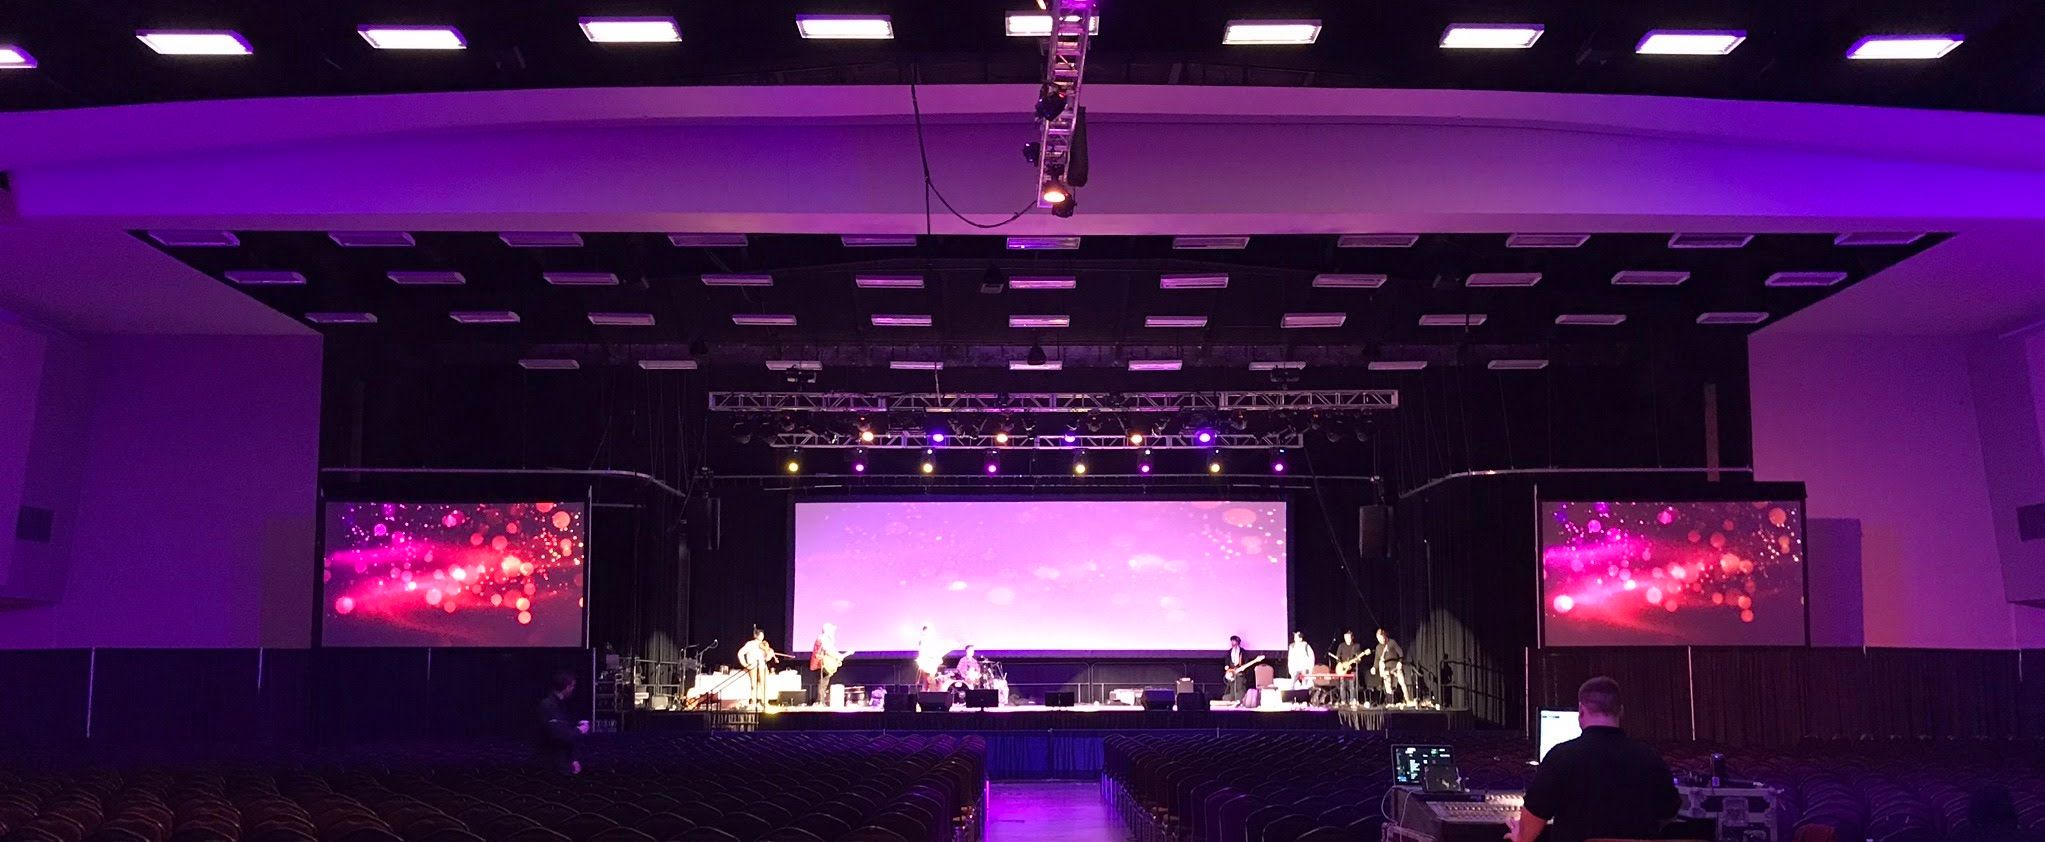 LED Lighting at a large scale conference